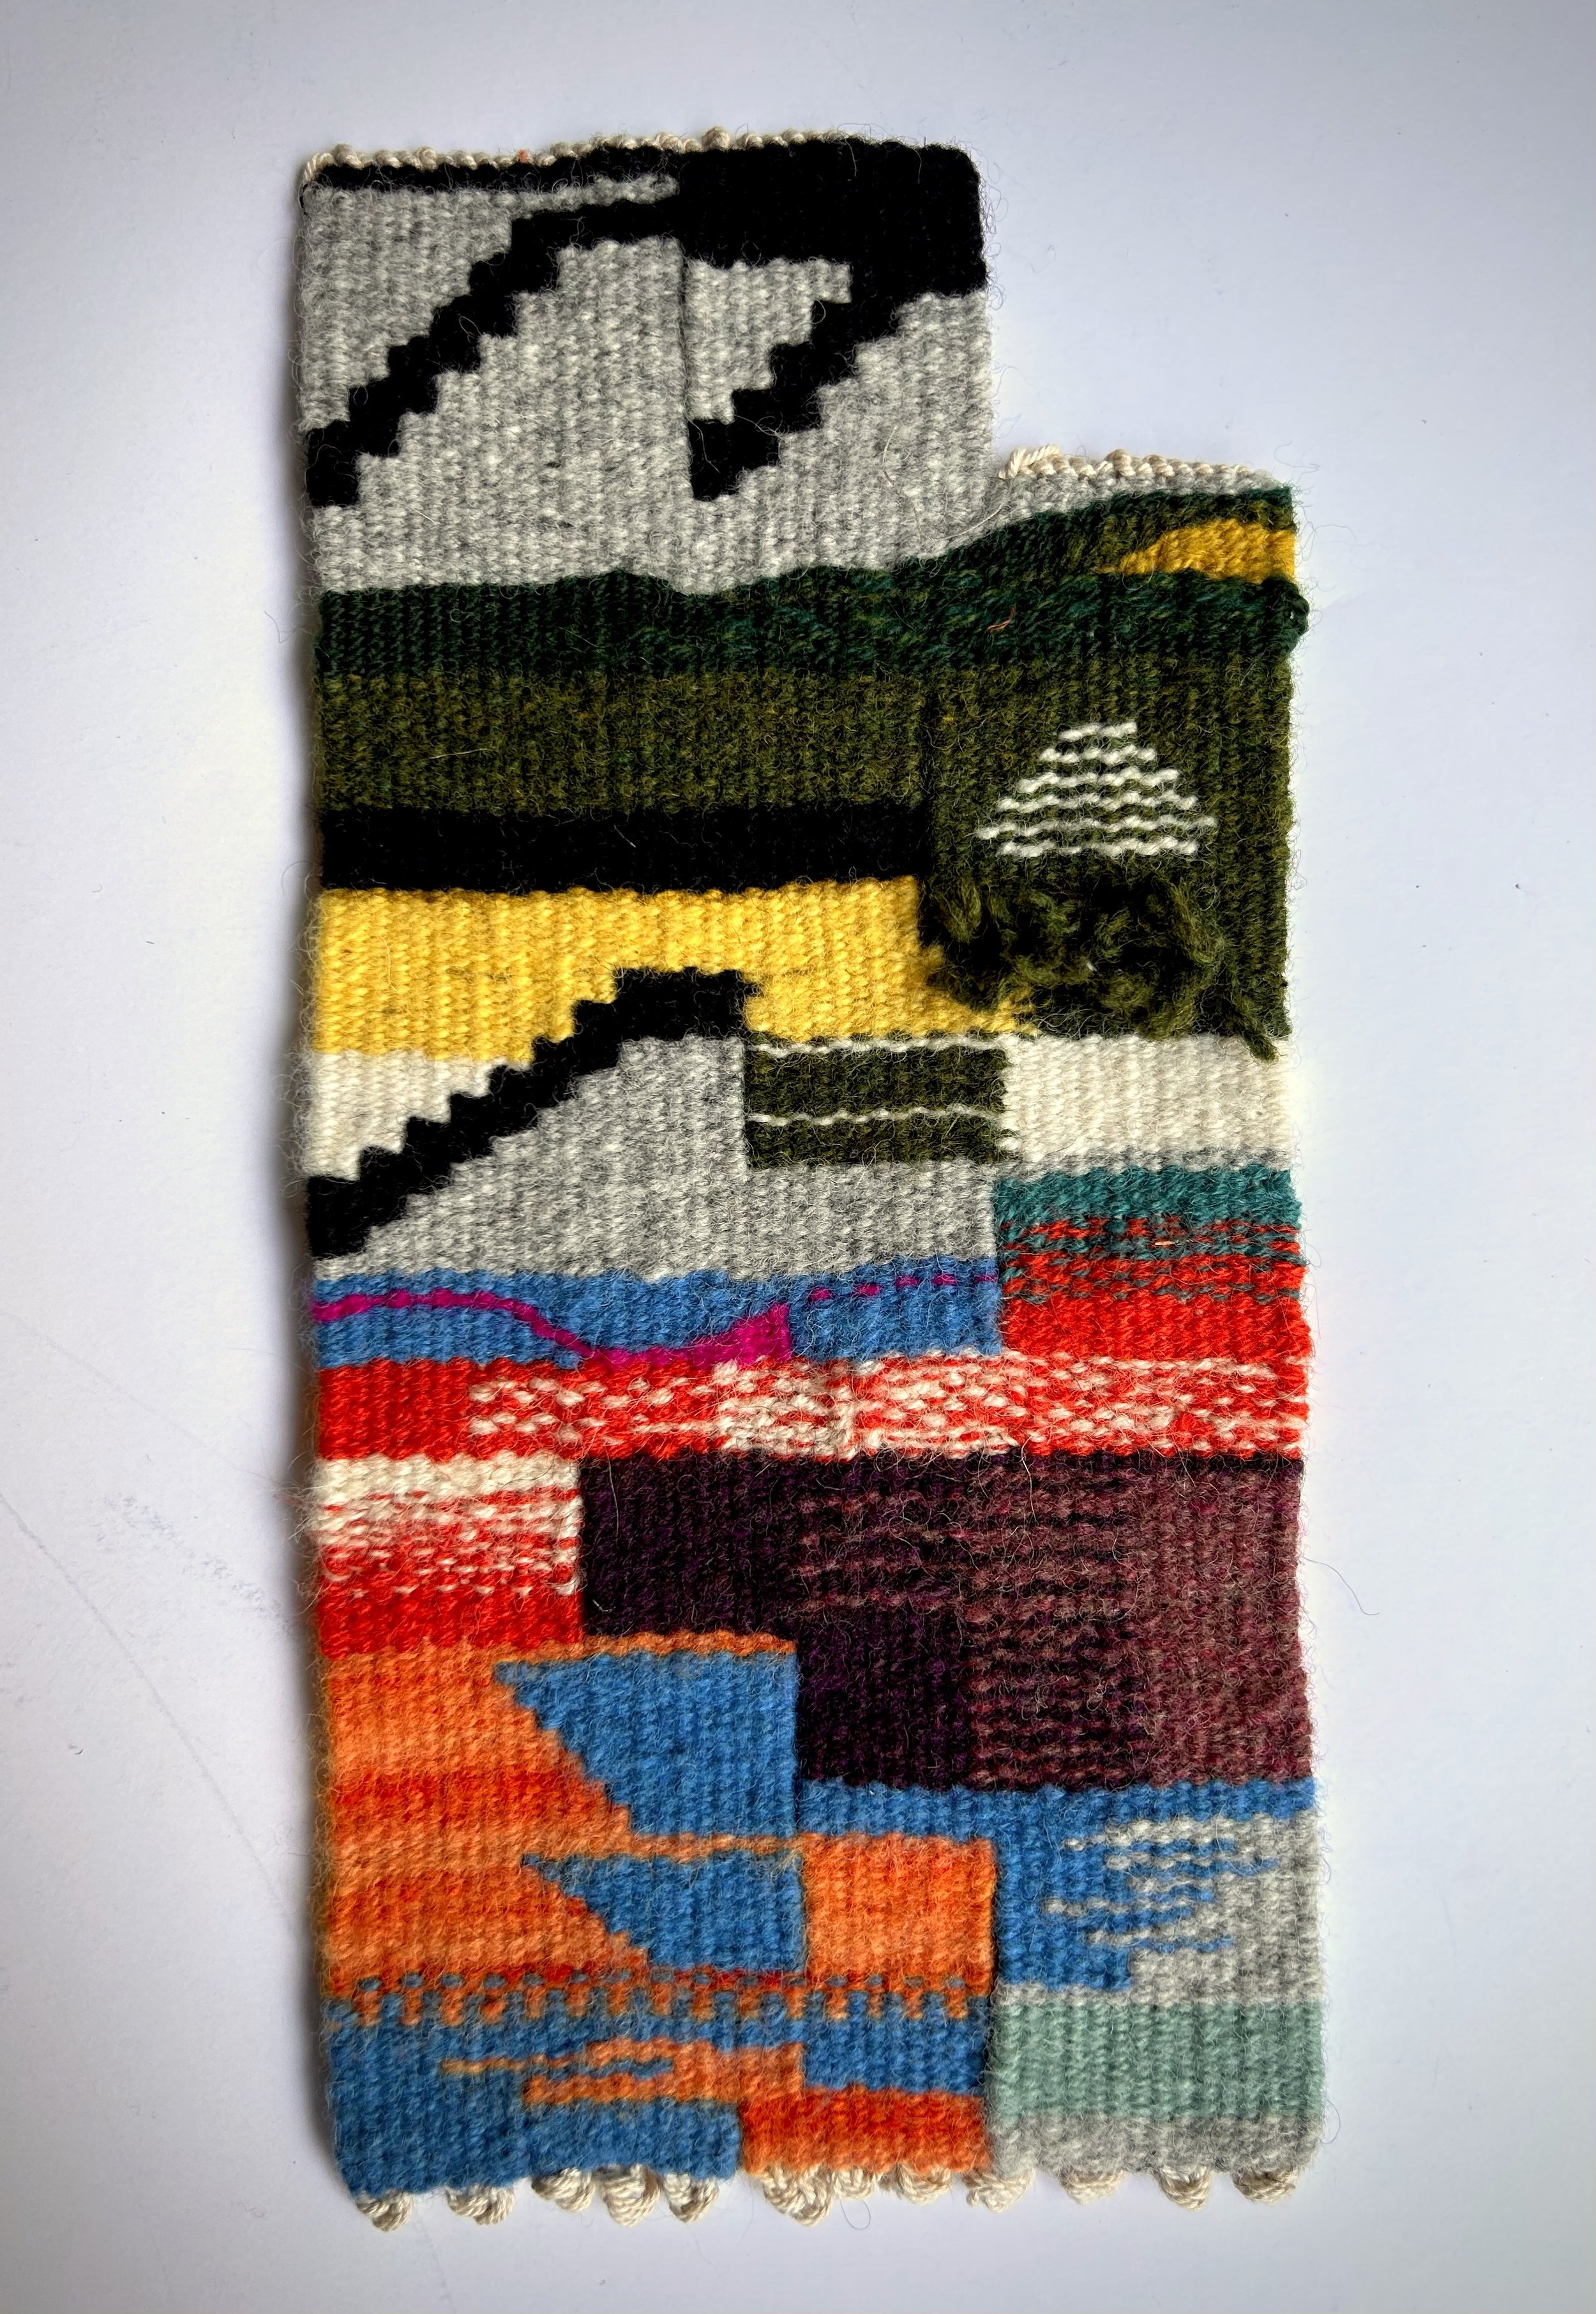   Stairways , 2022. Cotton warp and wool weft. 5.5” x 12”. Woven as a demonstration piece while teaching. 